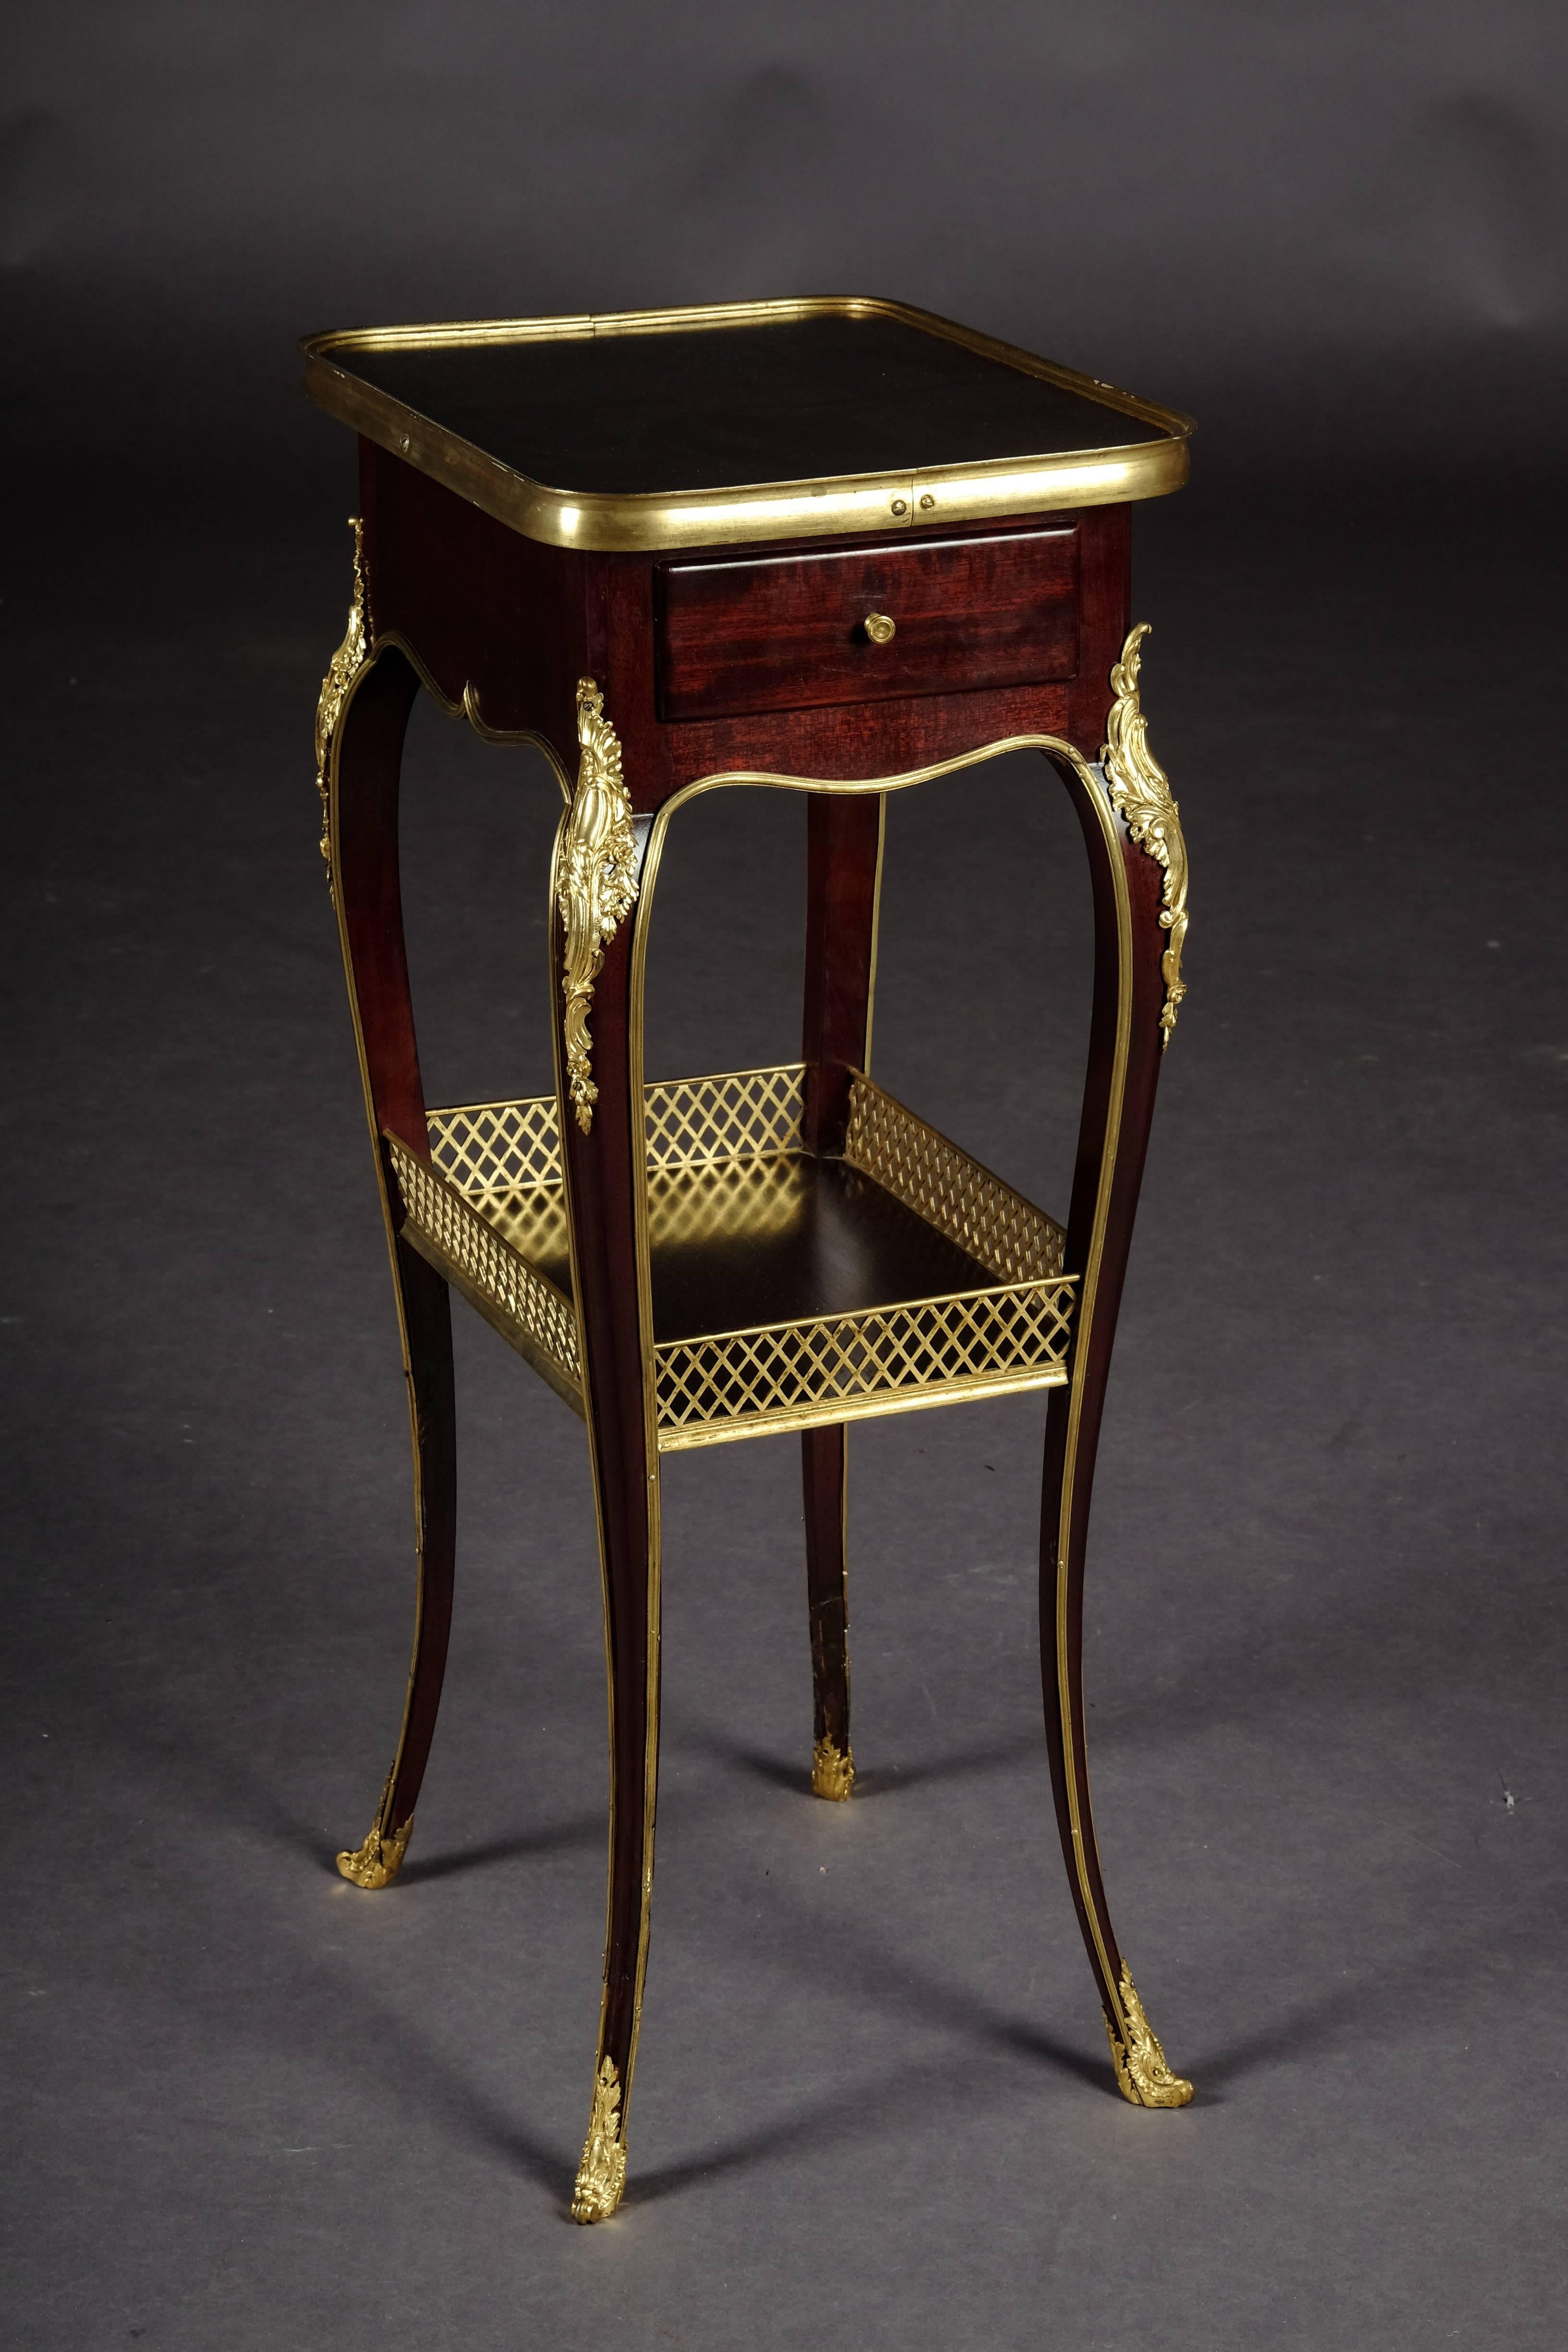 Solid mahogany and polished oak. Embracing frame box on high slightly curved legs with intermediate tray connected in sabots. Slightly protruding top plate in brass frame.

(G-69).